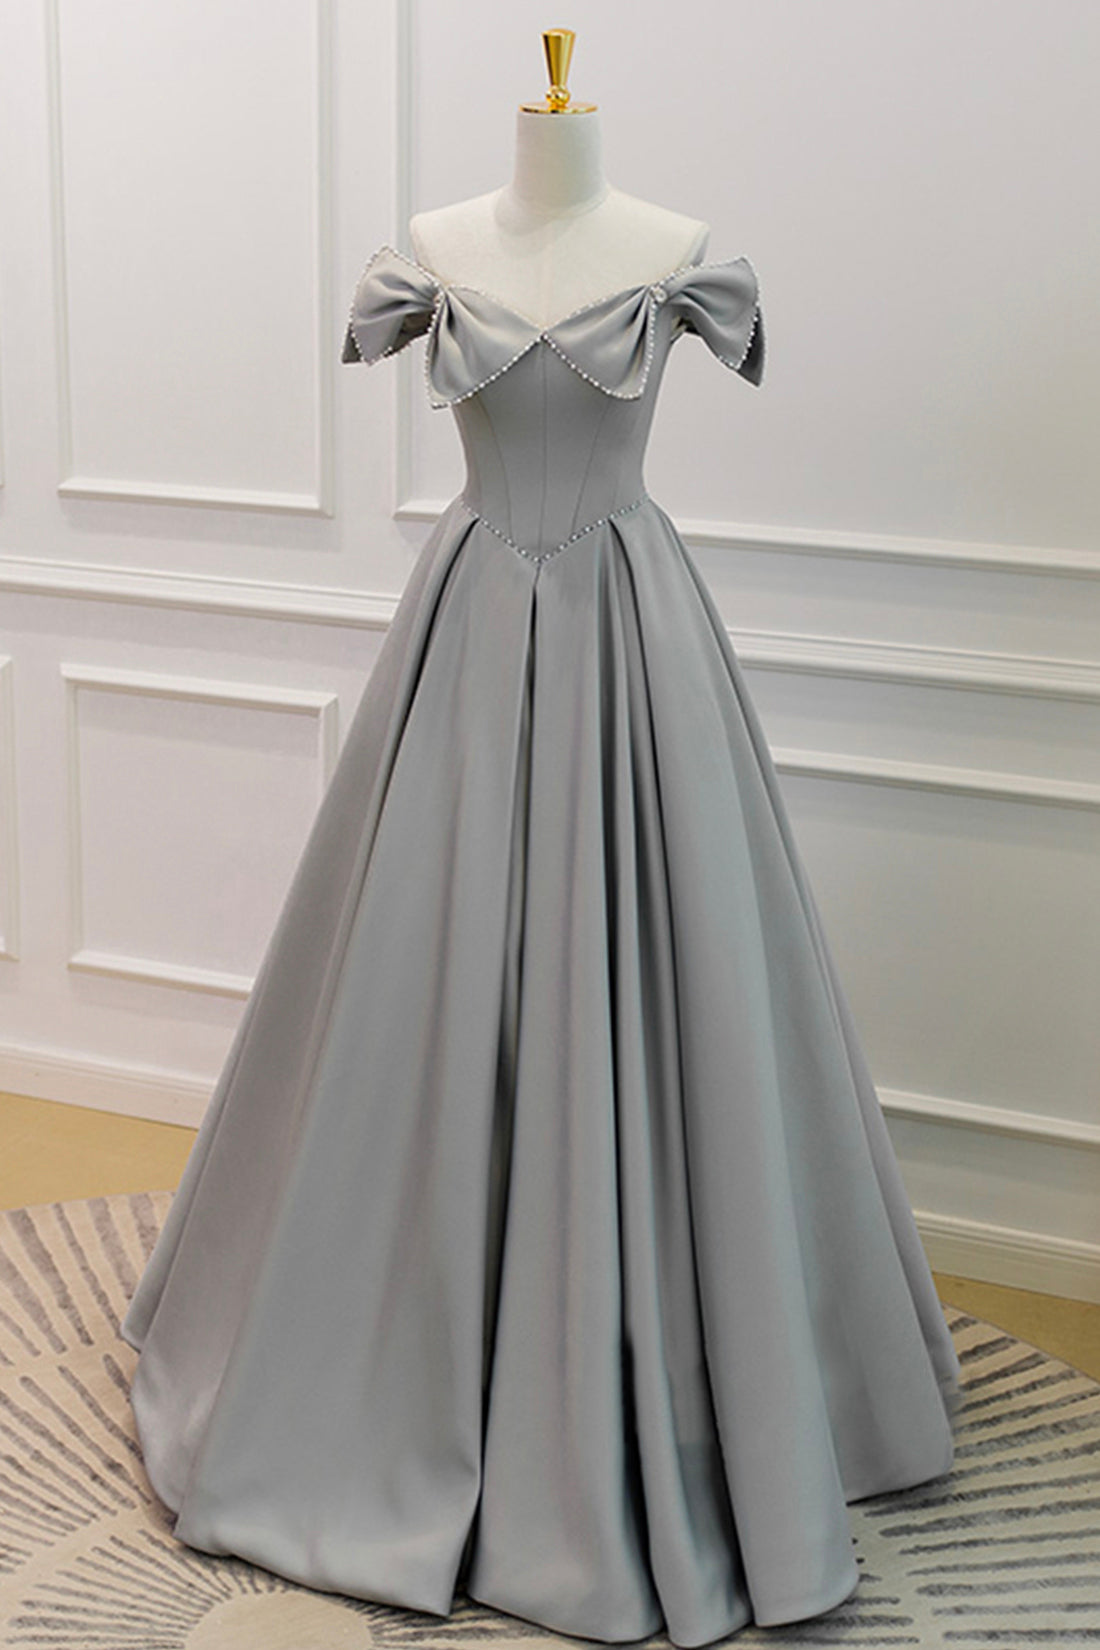 Engagement Photo, Gray Satin Floor Length Formal Dress with Pearls, Cute A-Line Prom Dress